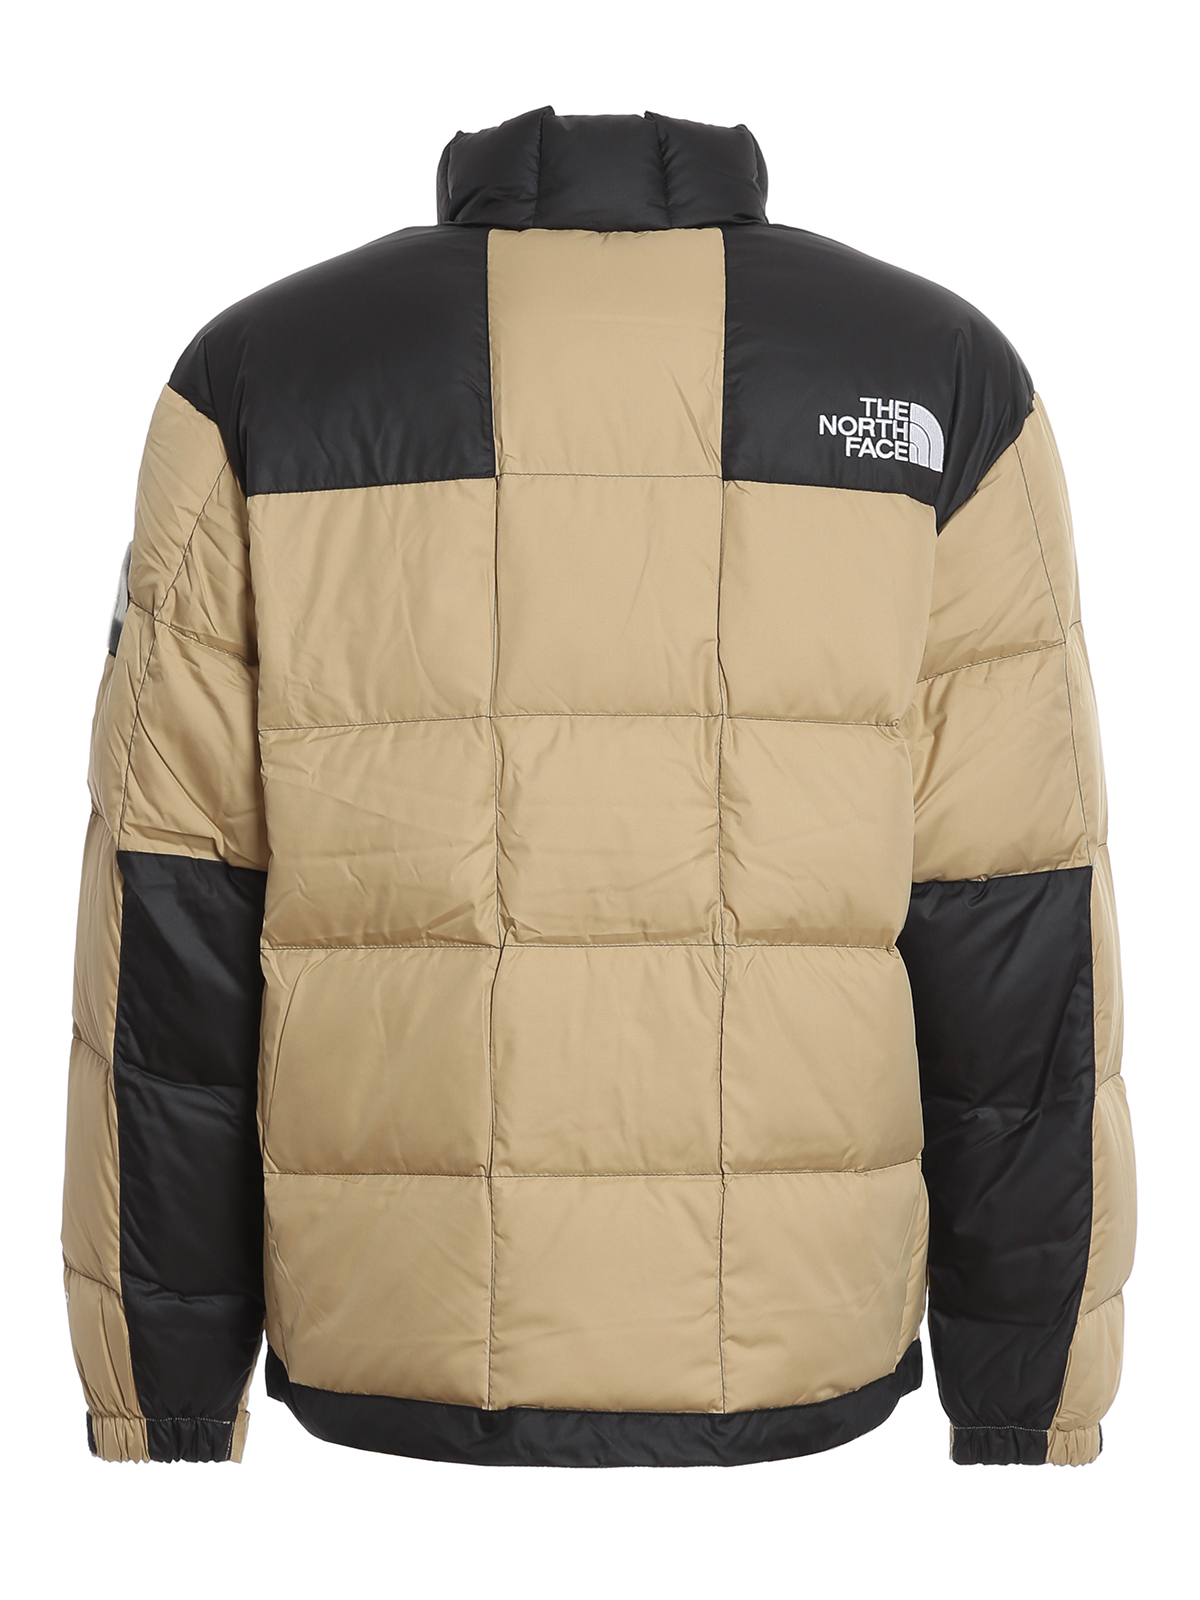 opstelling Habitat Alstublieft Padded jackets The North Face - Lhotse puffer jacket - NF0A3Y23H7E